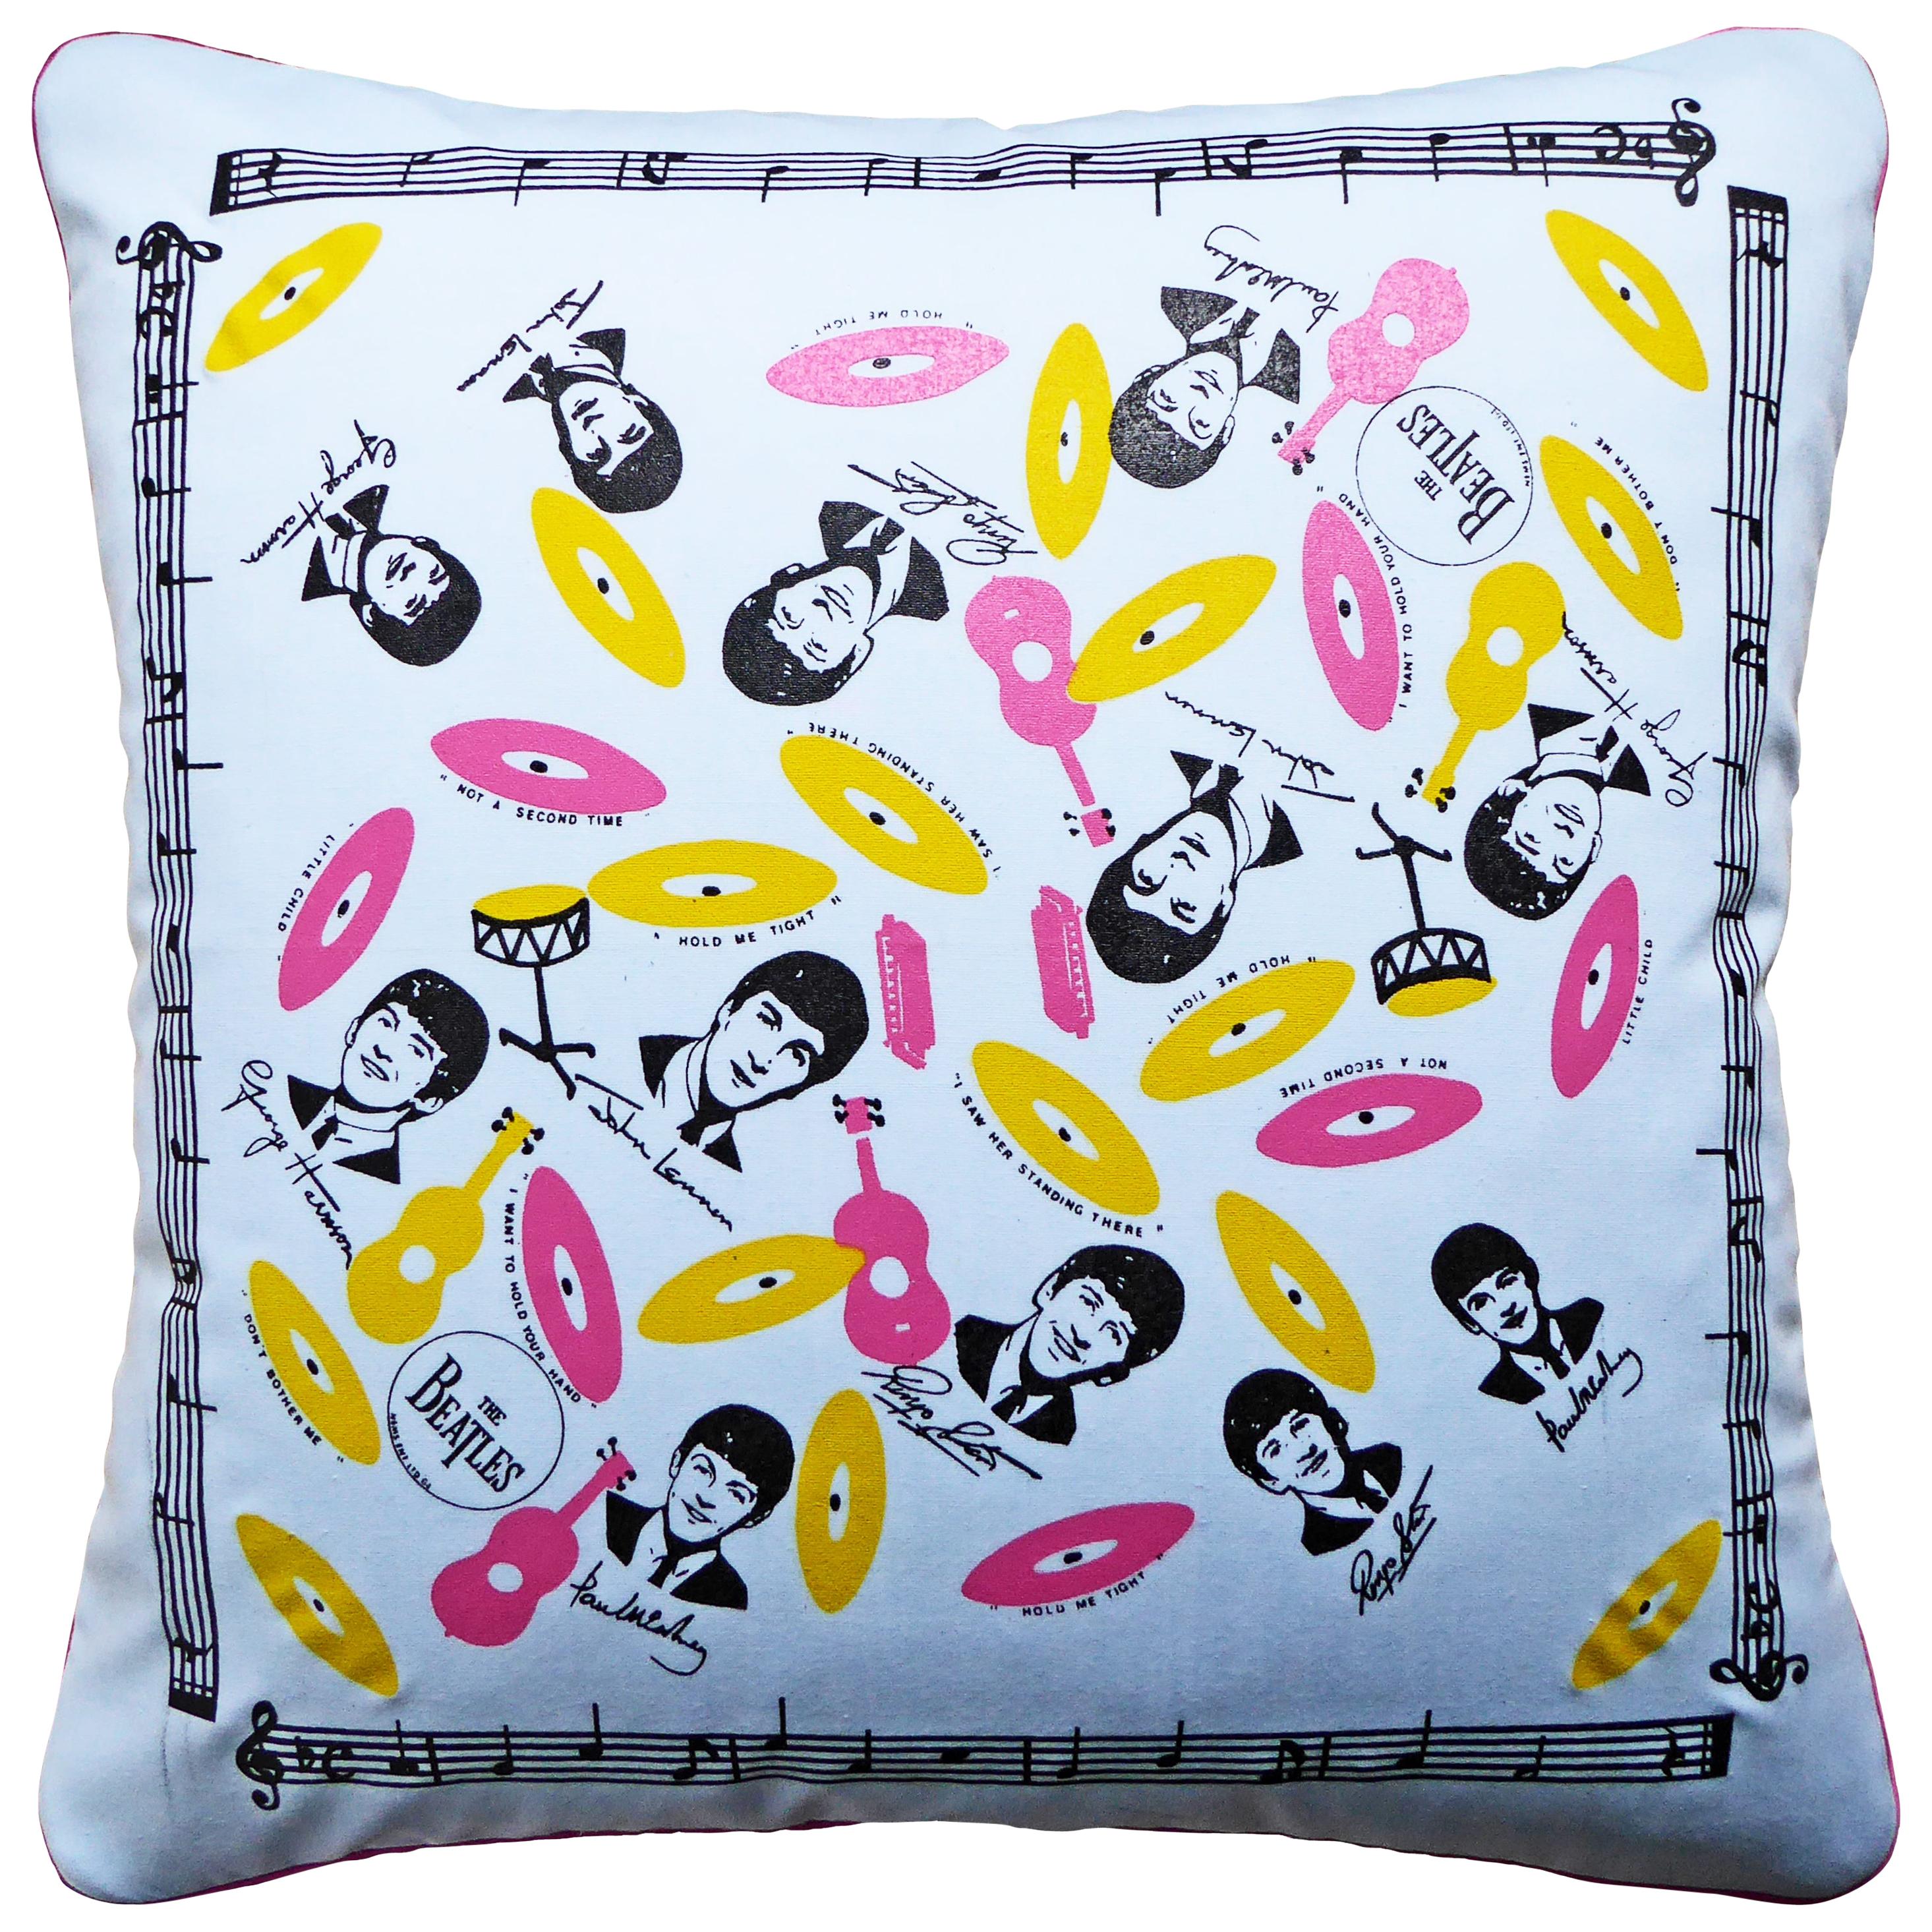 Vintage Cushions 'The Beatles' Bespoke Luxury Pillow/Cushion, Made in UK